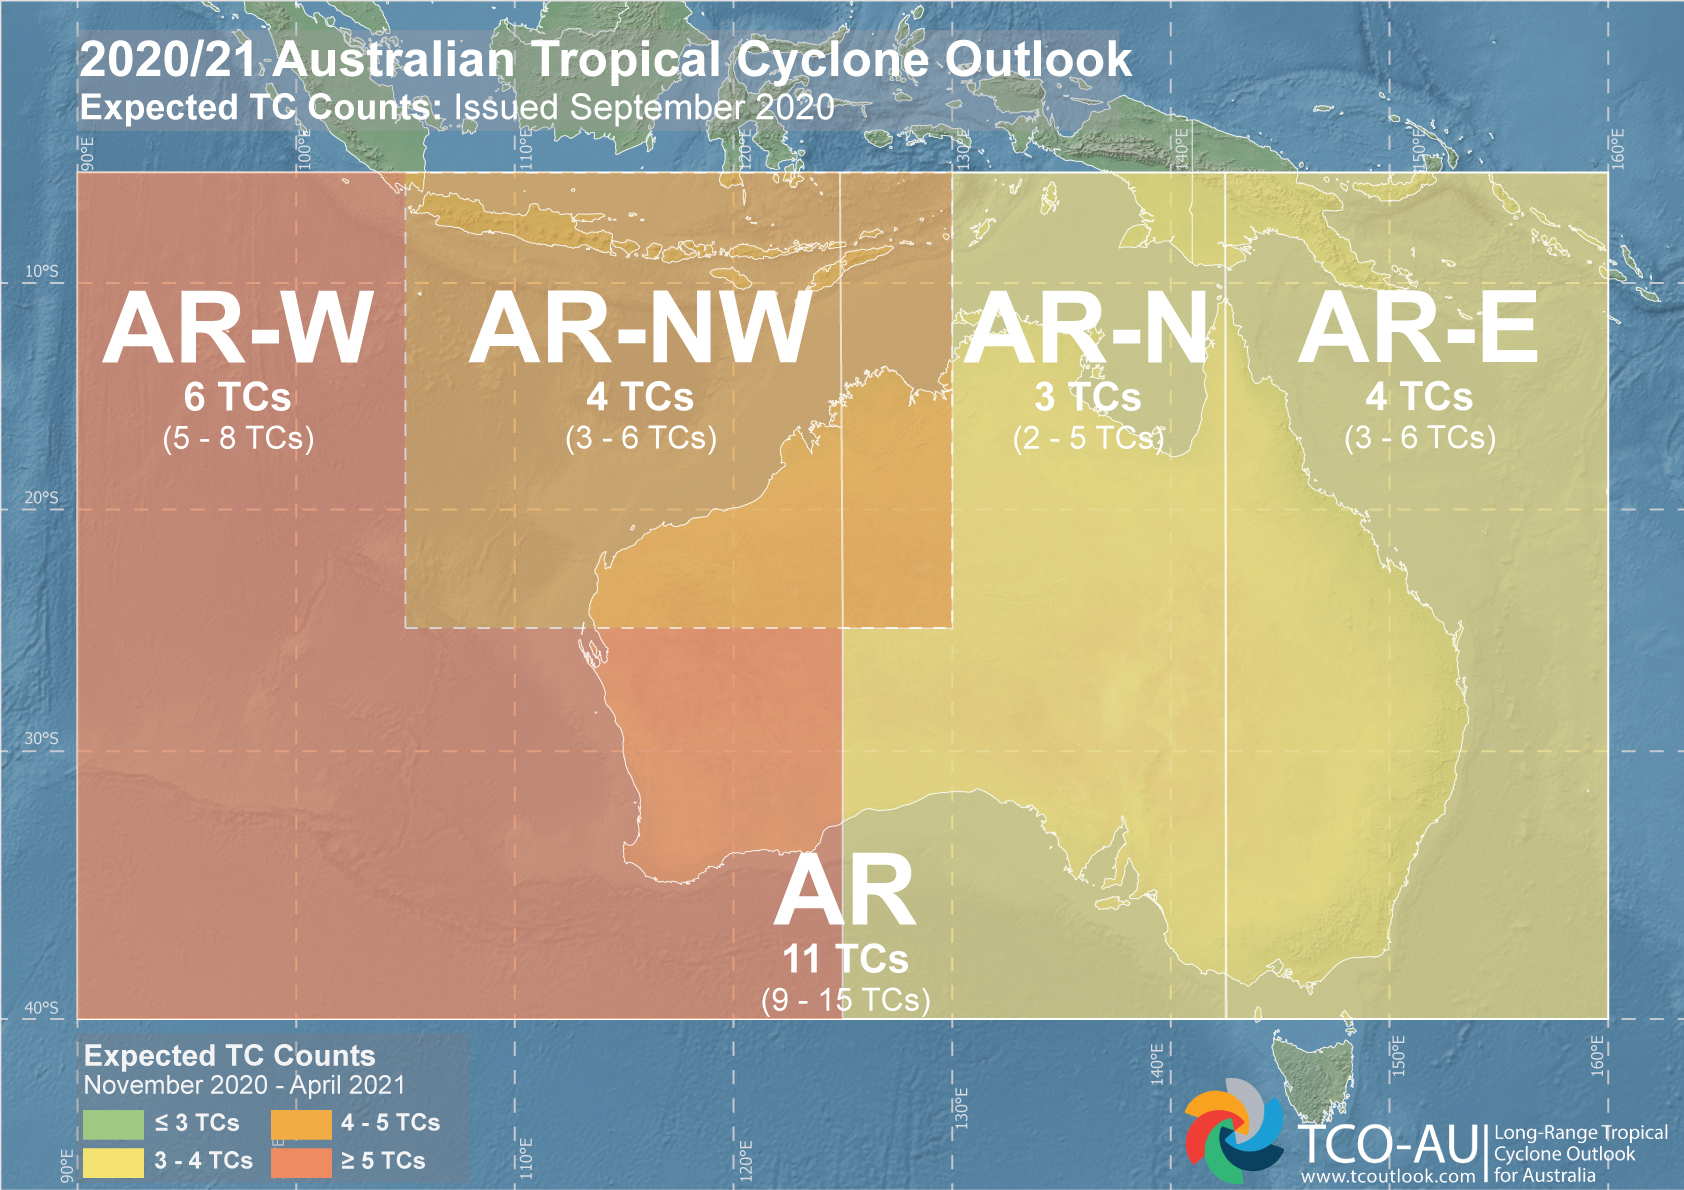 Map showing the tropical cyclone count for Australia